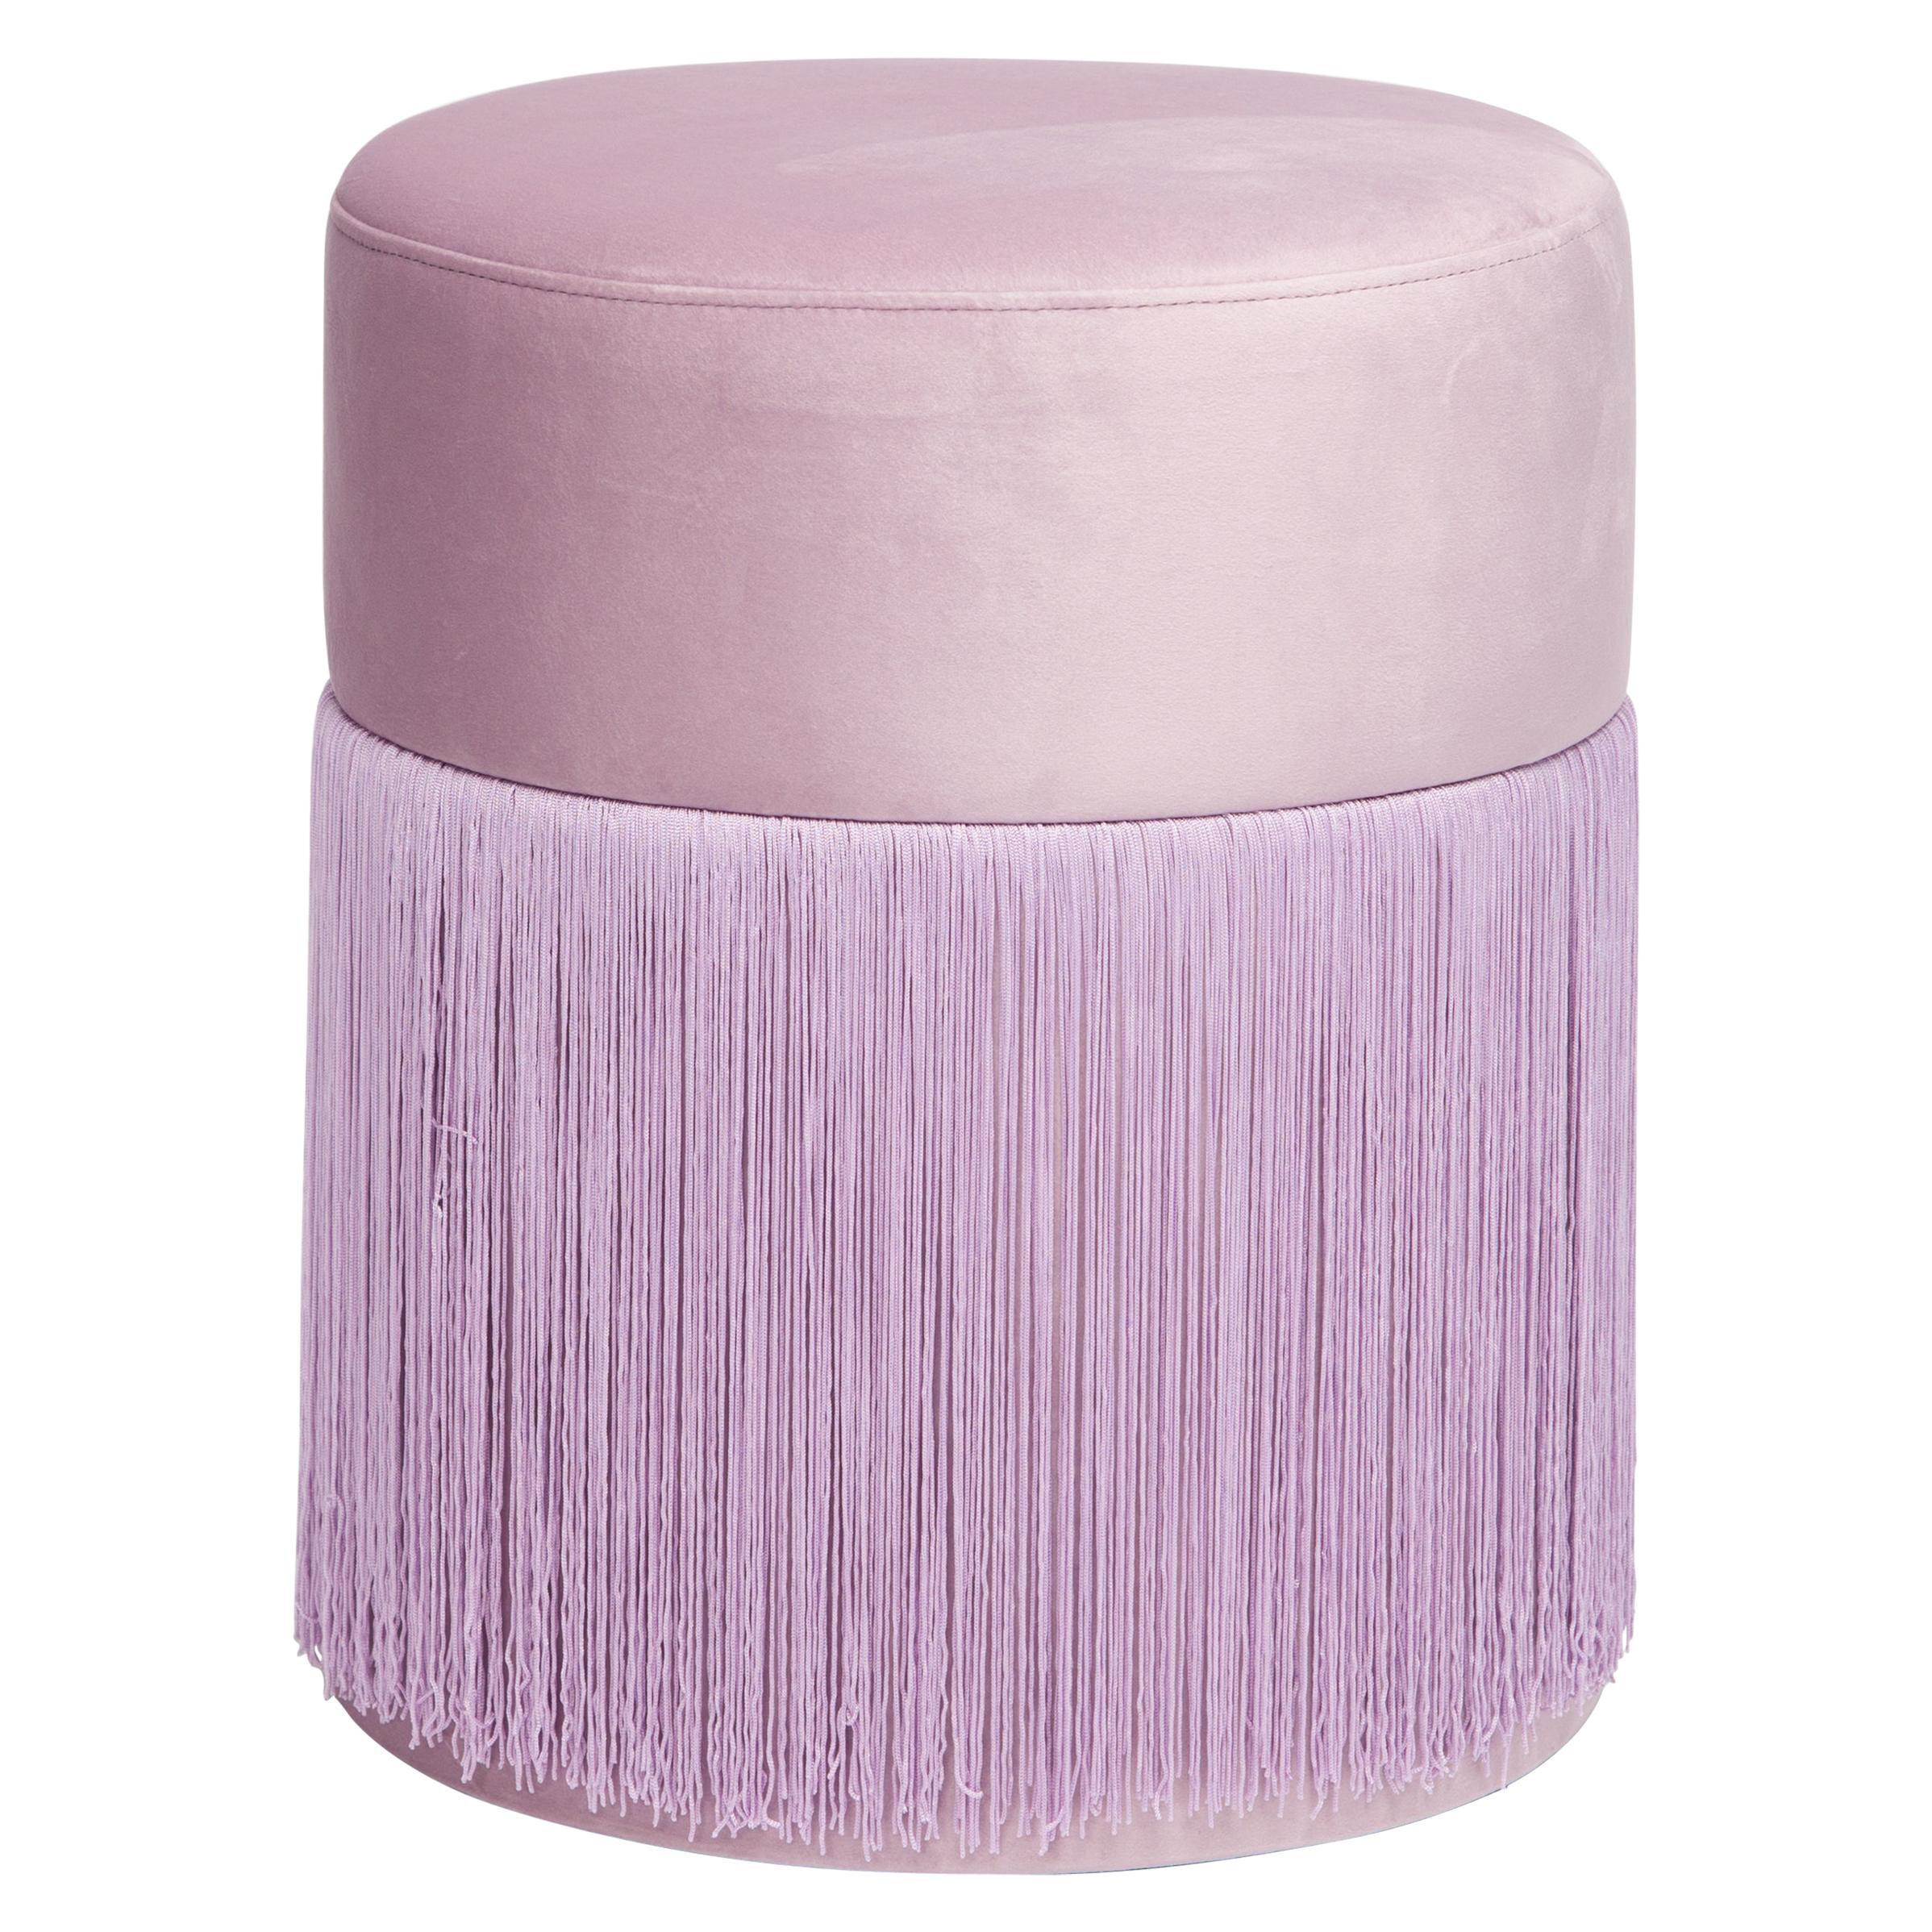 Pouf Pill S by Houtique